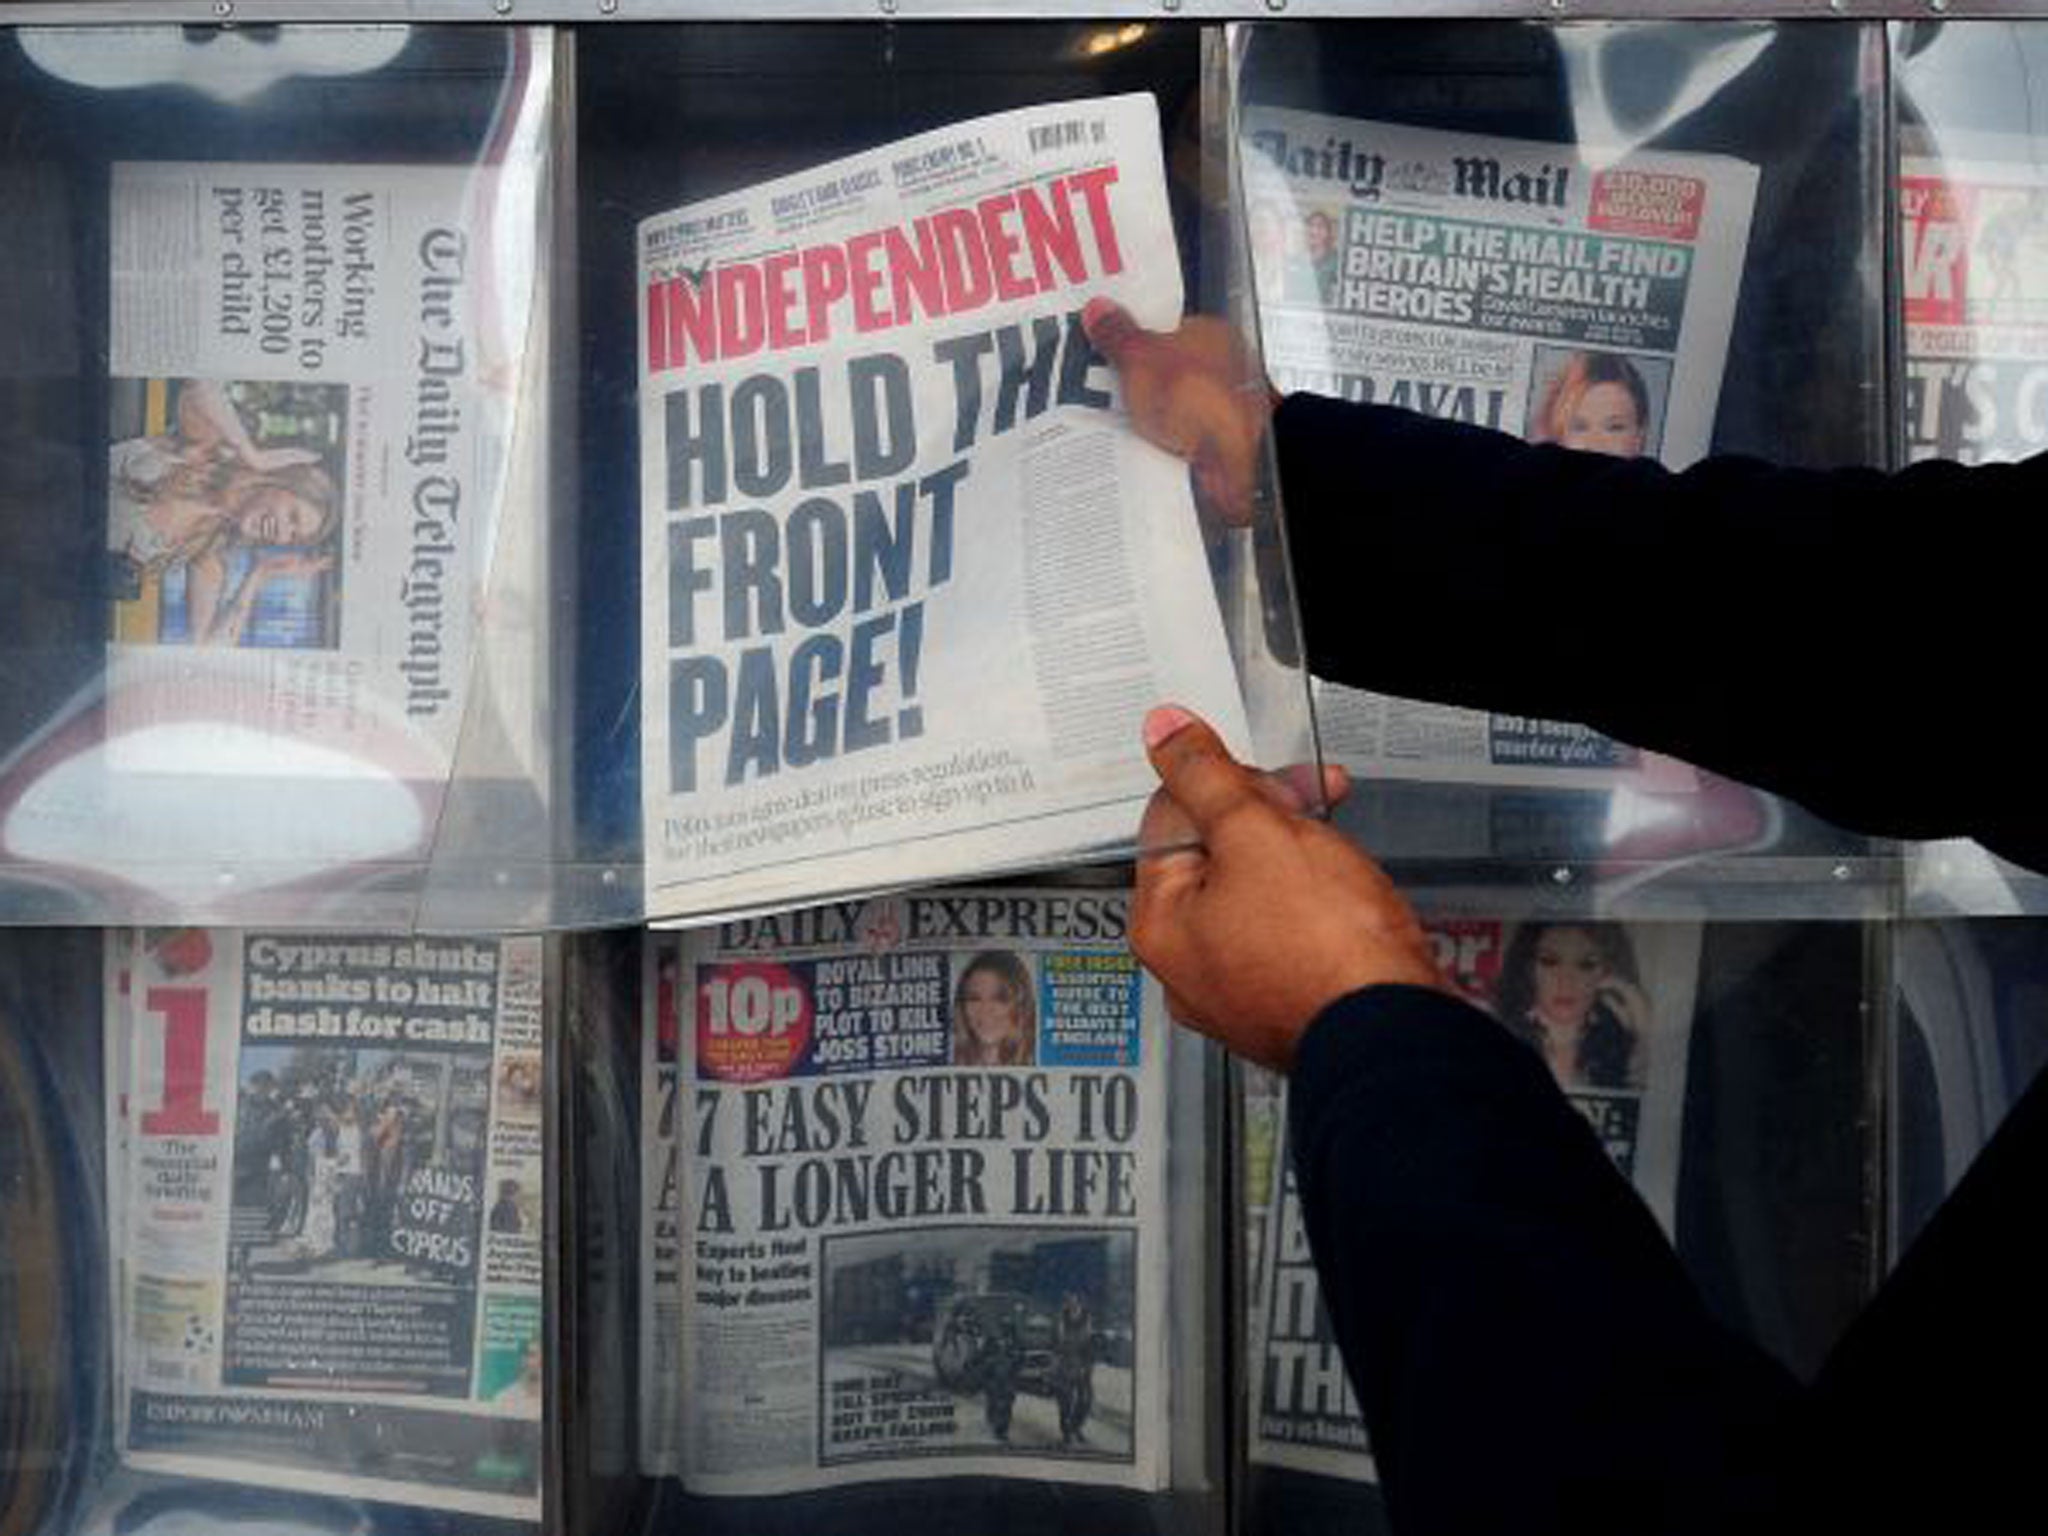 British newspapers played a vital role during lockdown